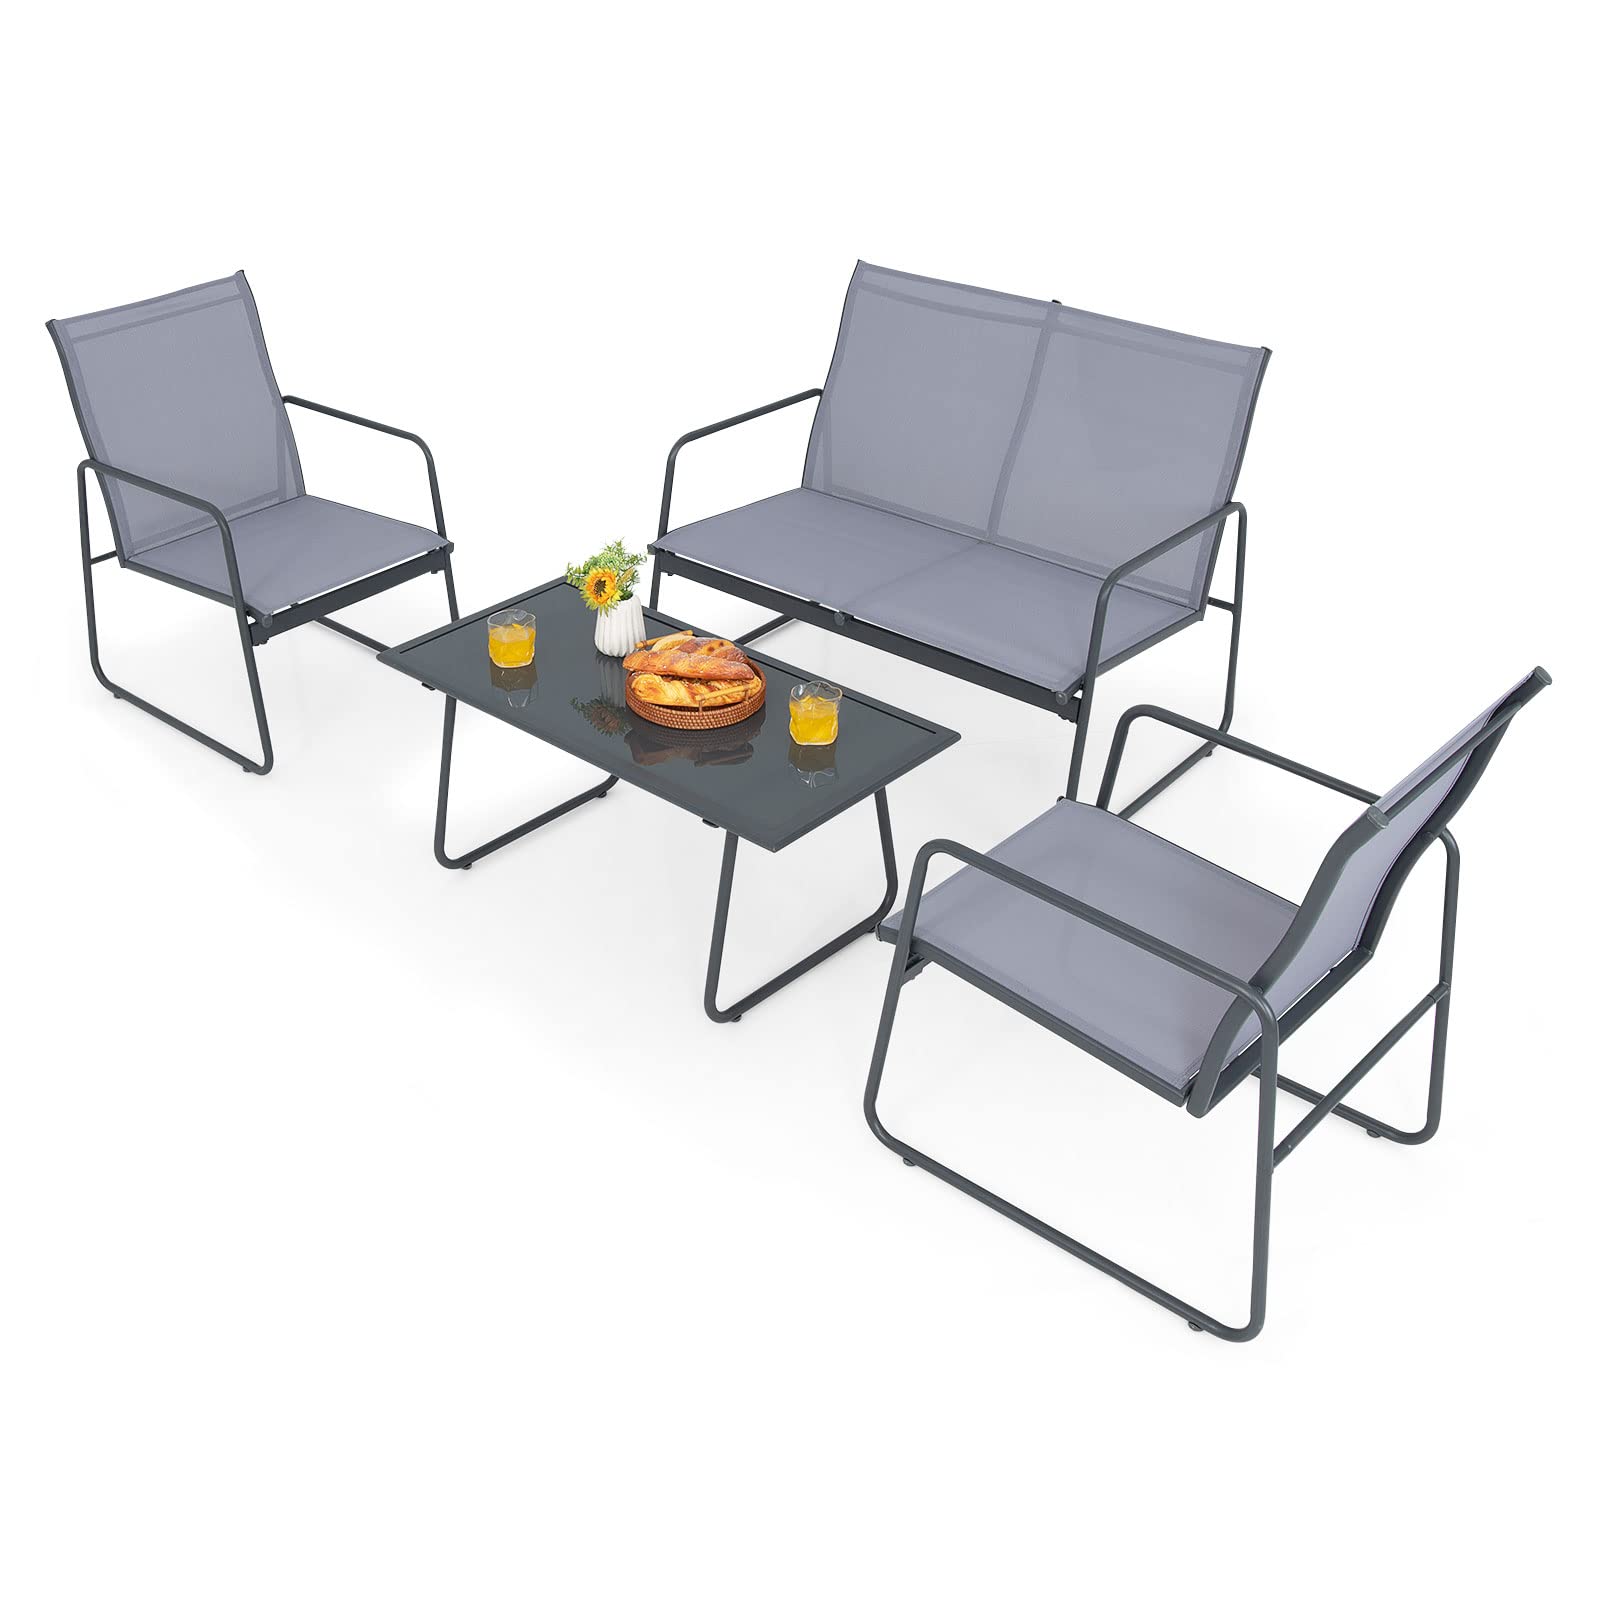 Giantex 4 Pieces Patio Furniture Set, Outdoor Conversation Set with 2 Patio Dining Chairs, Tempered Glass Coffee Table